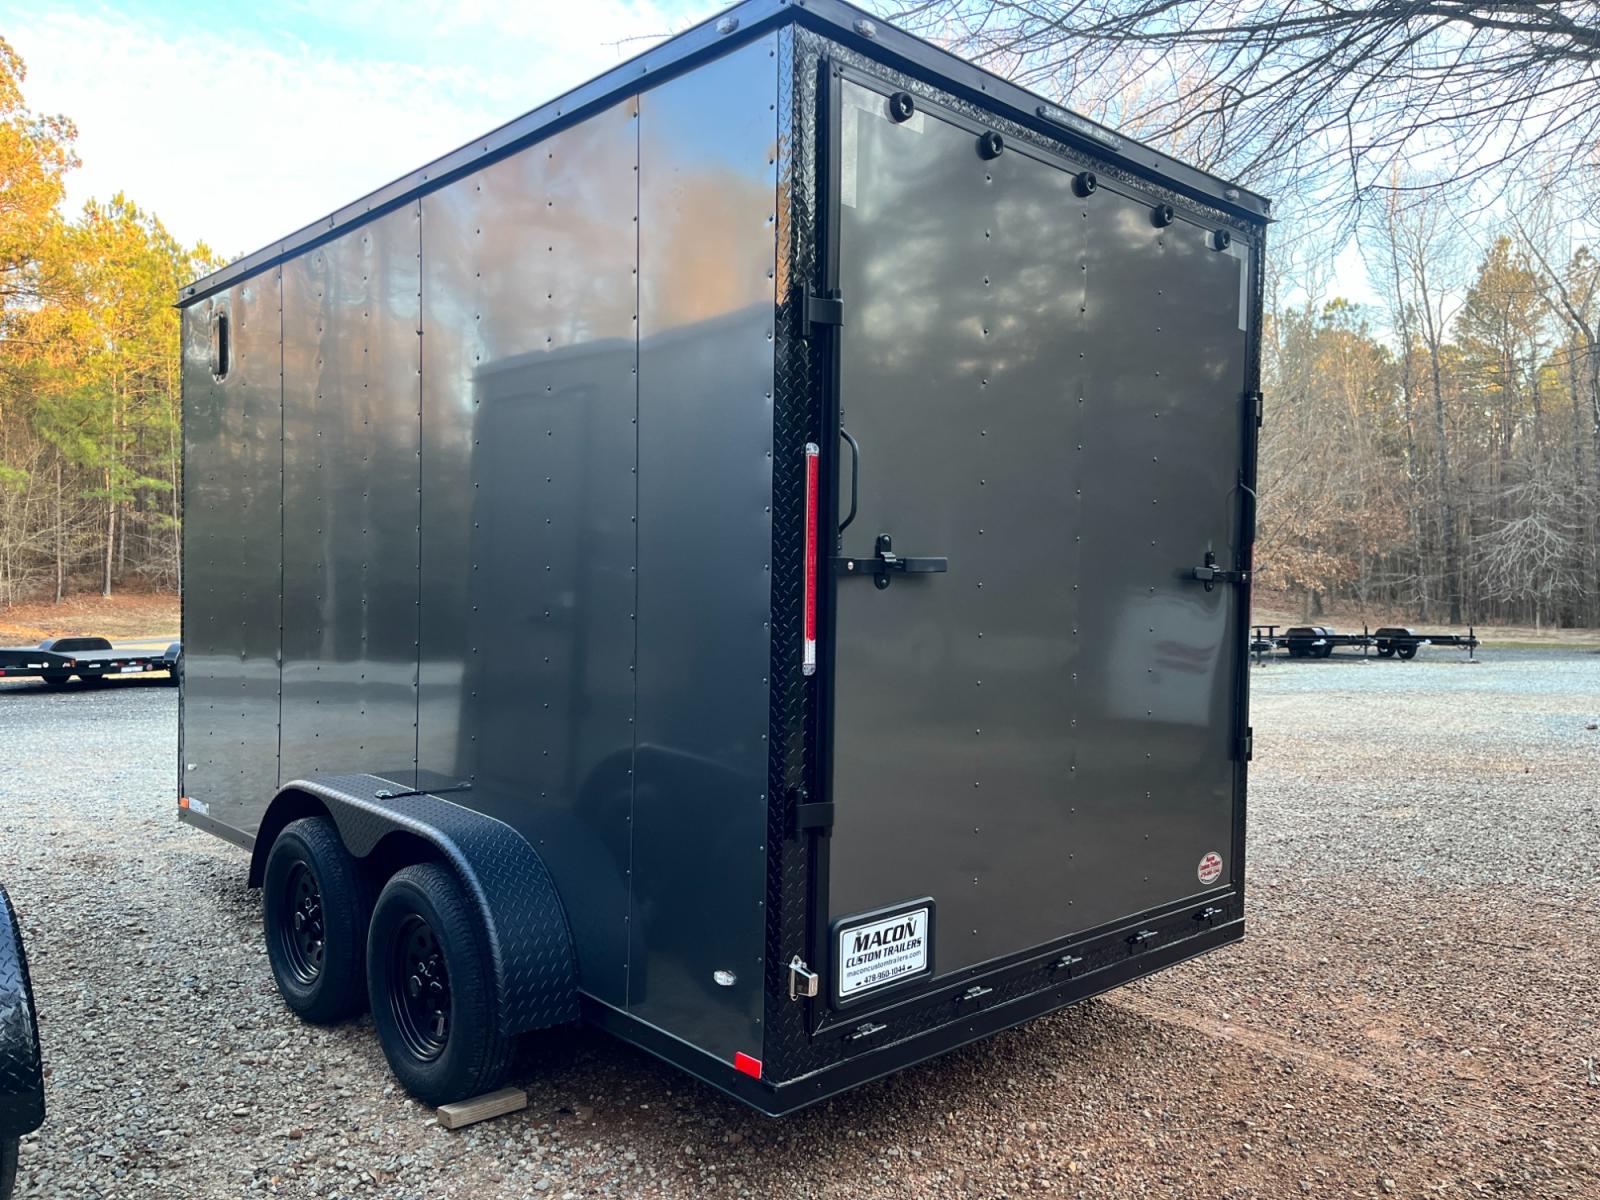 2023 .080 Charcoal Metallic w/Black Out Pkg. Elite Cargo 7ft X 14ft Tandem , located at 1330 Rainey Rd., Macon, 31220, (478) 960-1044, 32.845638, -83.778687 - Brand New 2023 "Top of the Line" Elite Cargo Brand Trailer Made in South Ga. Awesome 7ft X 14ft Tandem Enclosed Cycle Hauler & Cargo Trailer! Taller Inside Height is 7ft 6" Tall Inside & Ramp Door Clearance is 7ft! .080 Thick Metallic Charcoal Aluminum Skin is Awesome! Black Out Pkg Trim, Wider - Photo #4